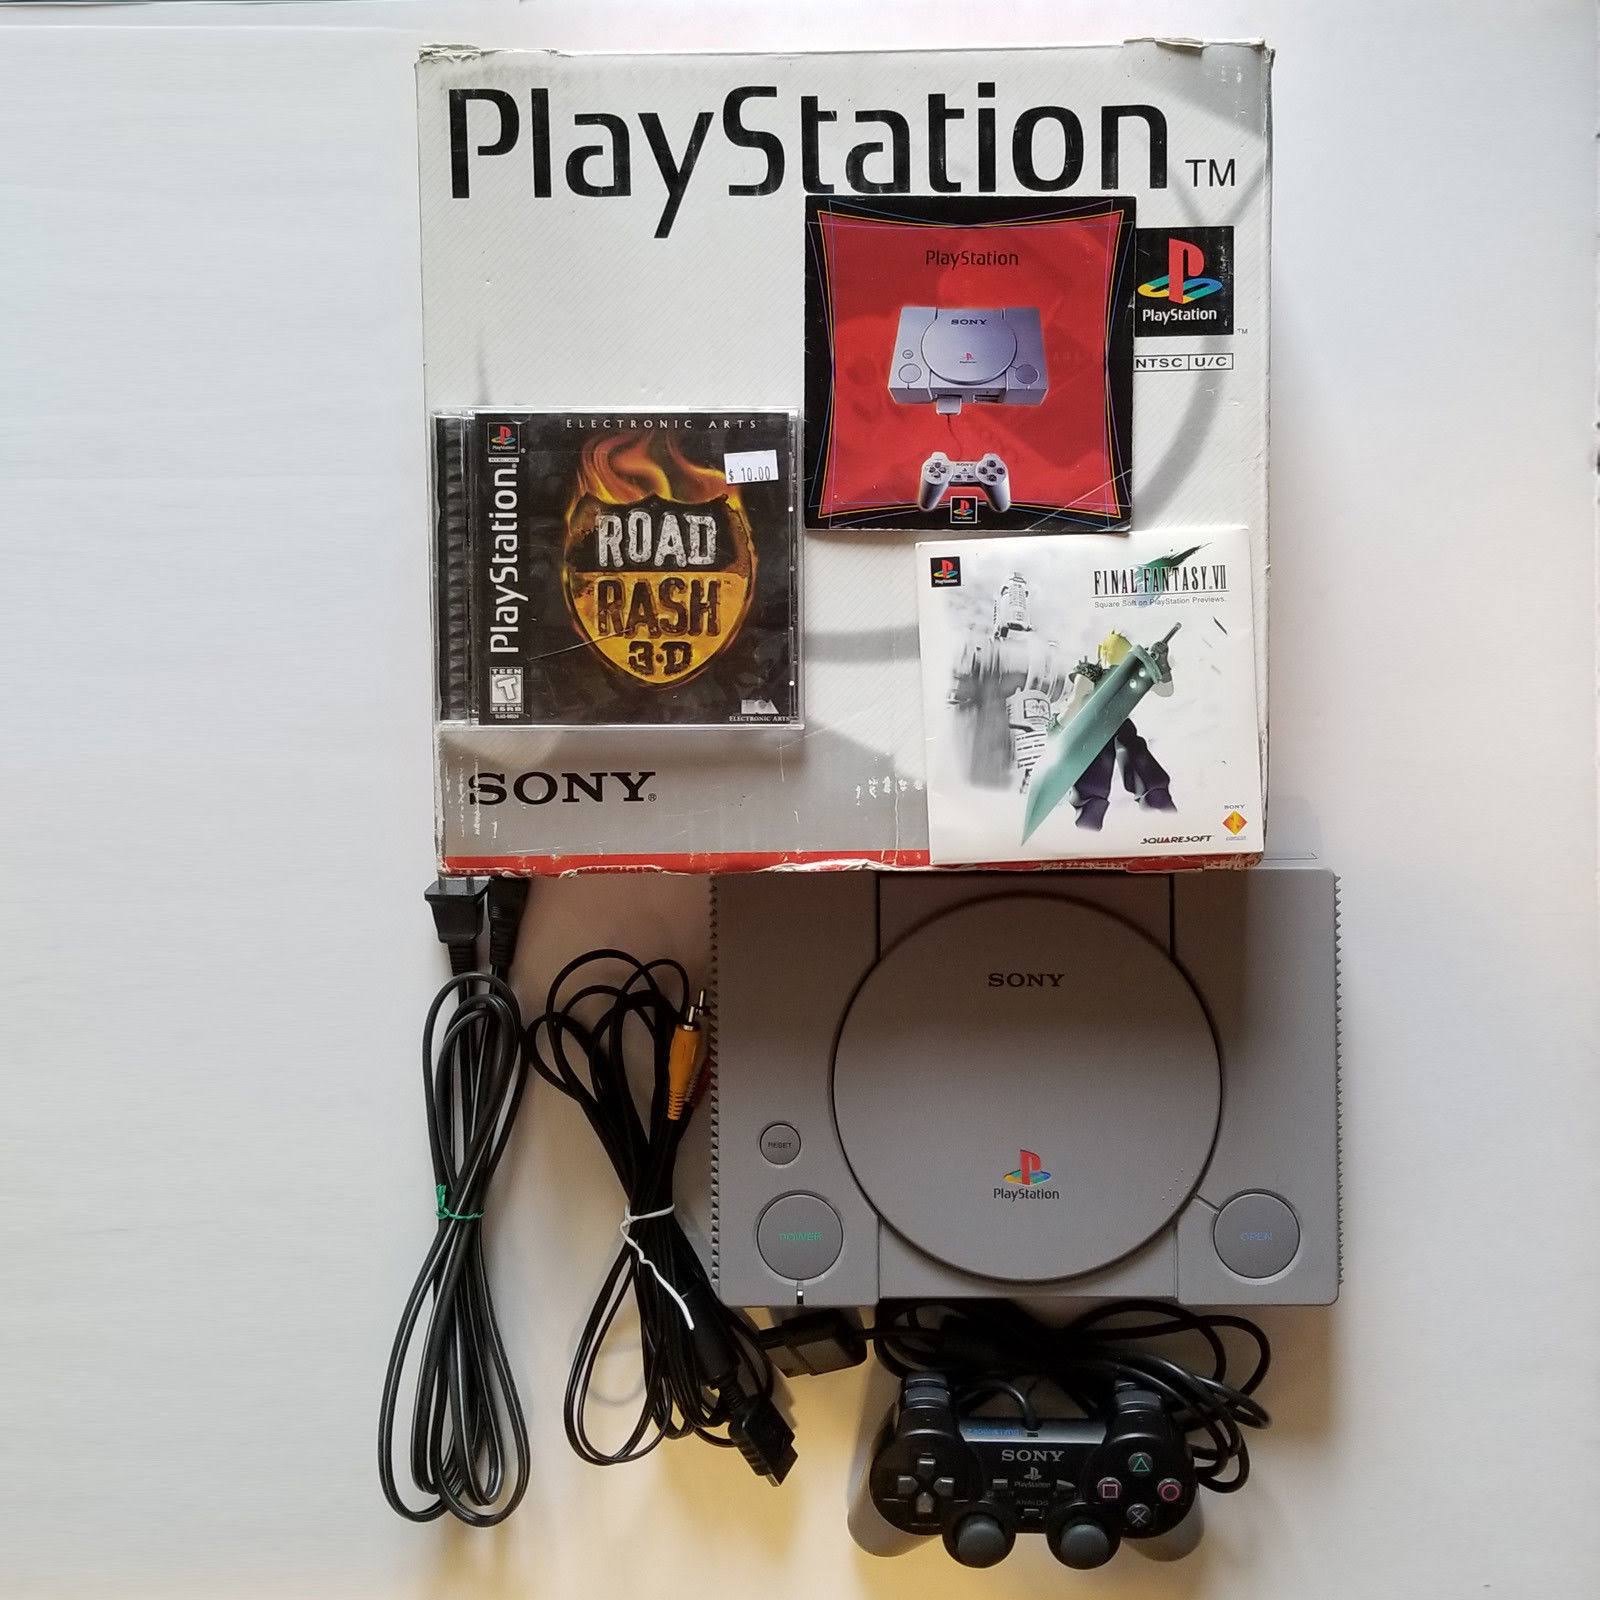 Sony Playstation PS One Video Game Console